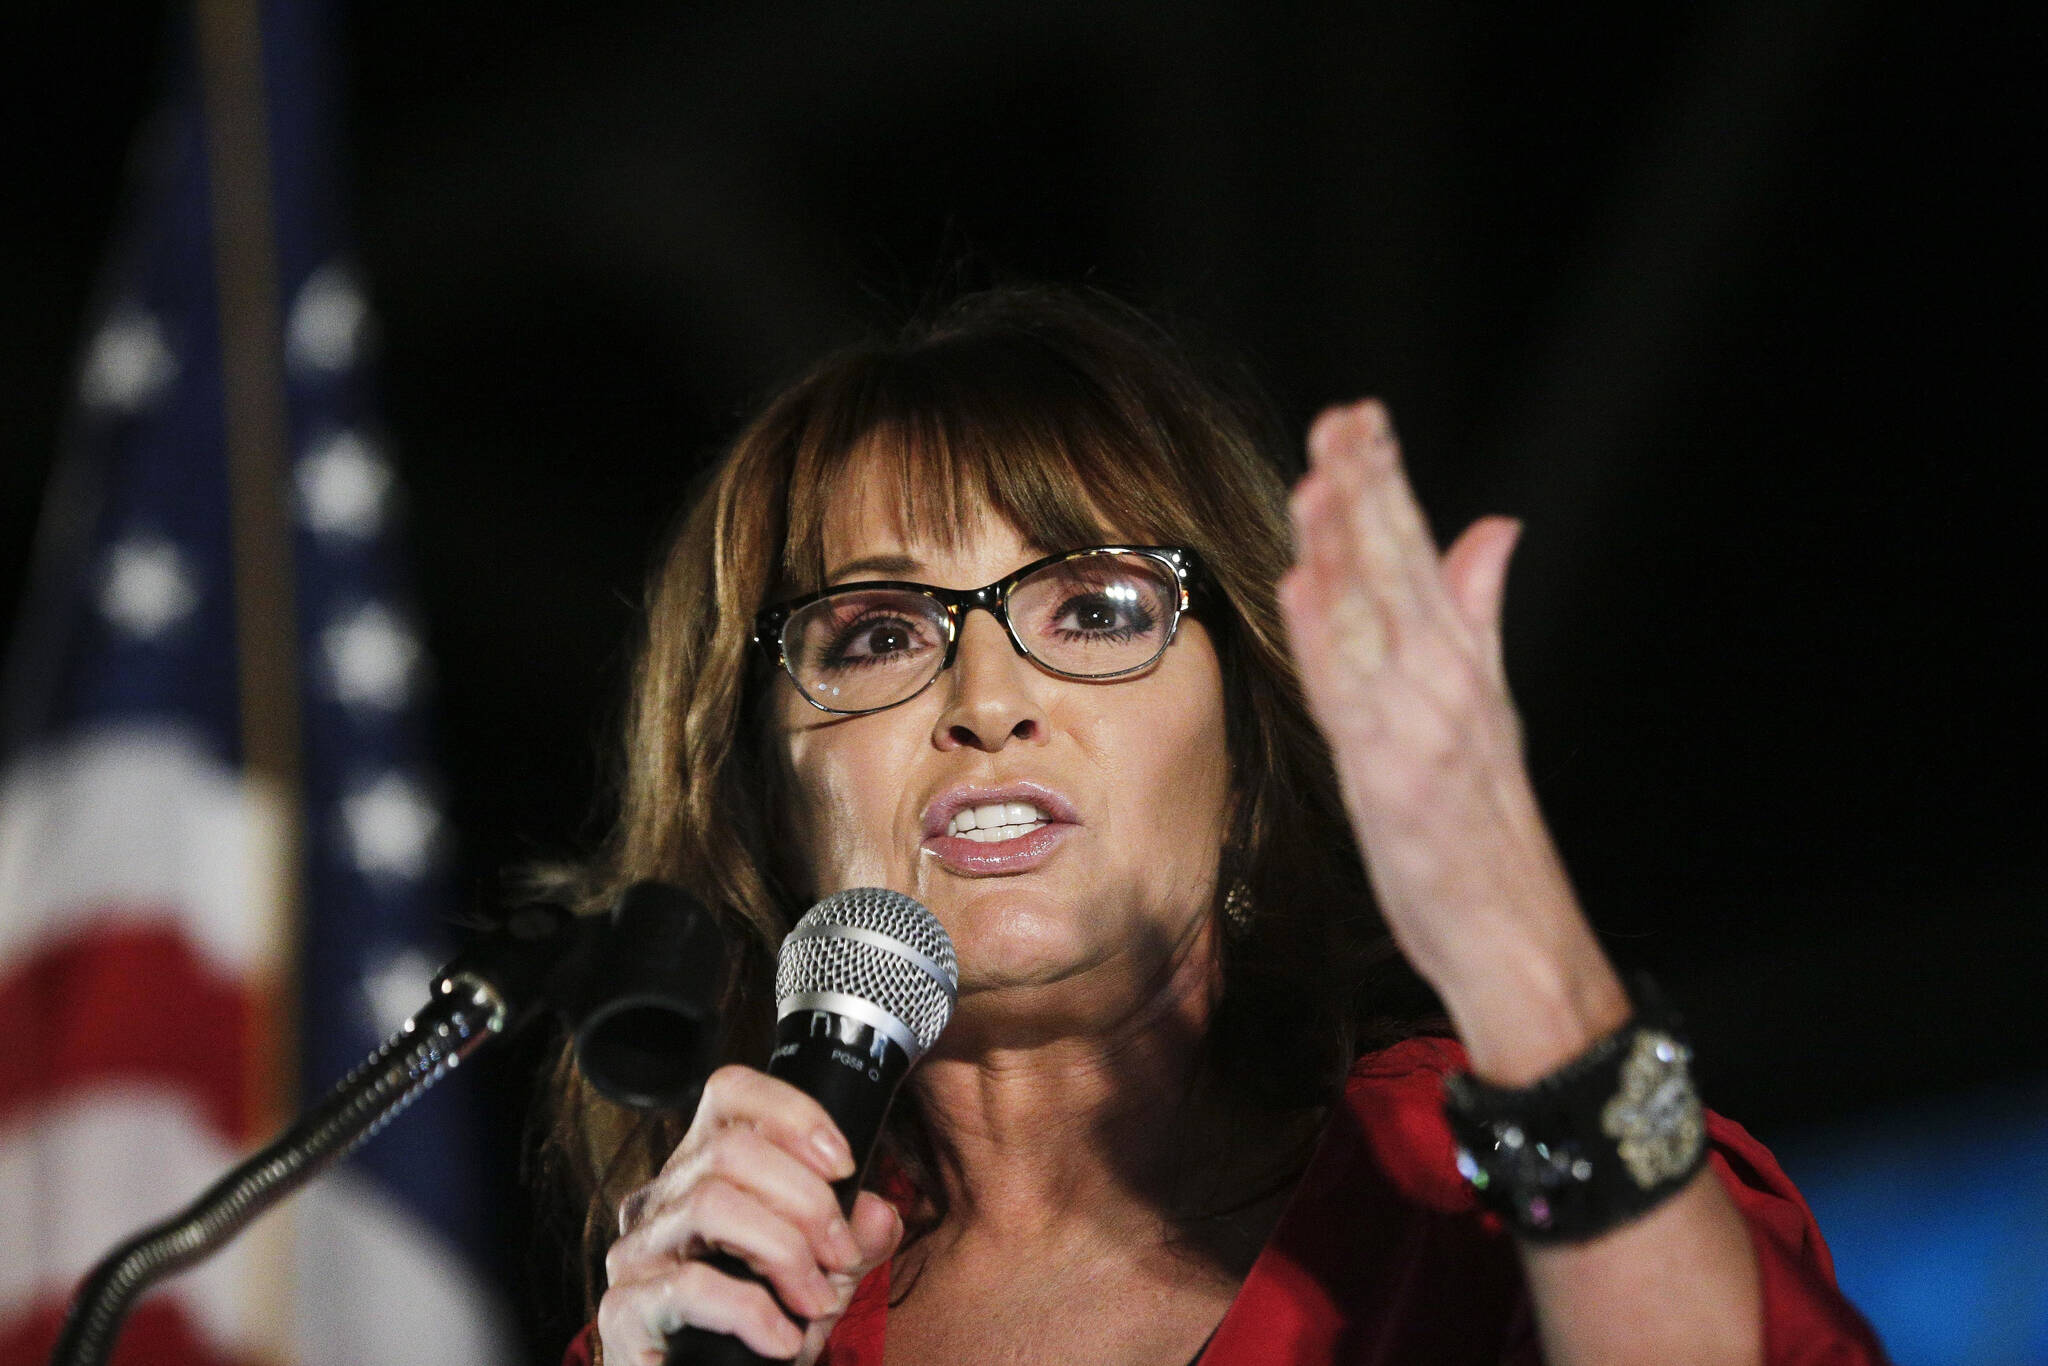 Then-vice presidential candidate Sarah Palin speaks at a rally in Montgomery, Ala., in 2017. Palin is on the verge of making new headlines in a legal battle with The New York Times. A defamation lawsuit against the Times, brought by the brash former Alaska governor in 2017, is set to go to trial starting Monday, Jan. 24, 2022 in federal court in Manhattan. (AP Photo / Brynn Anderson)